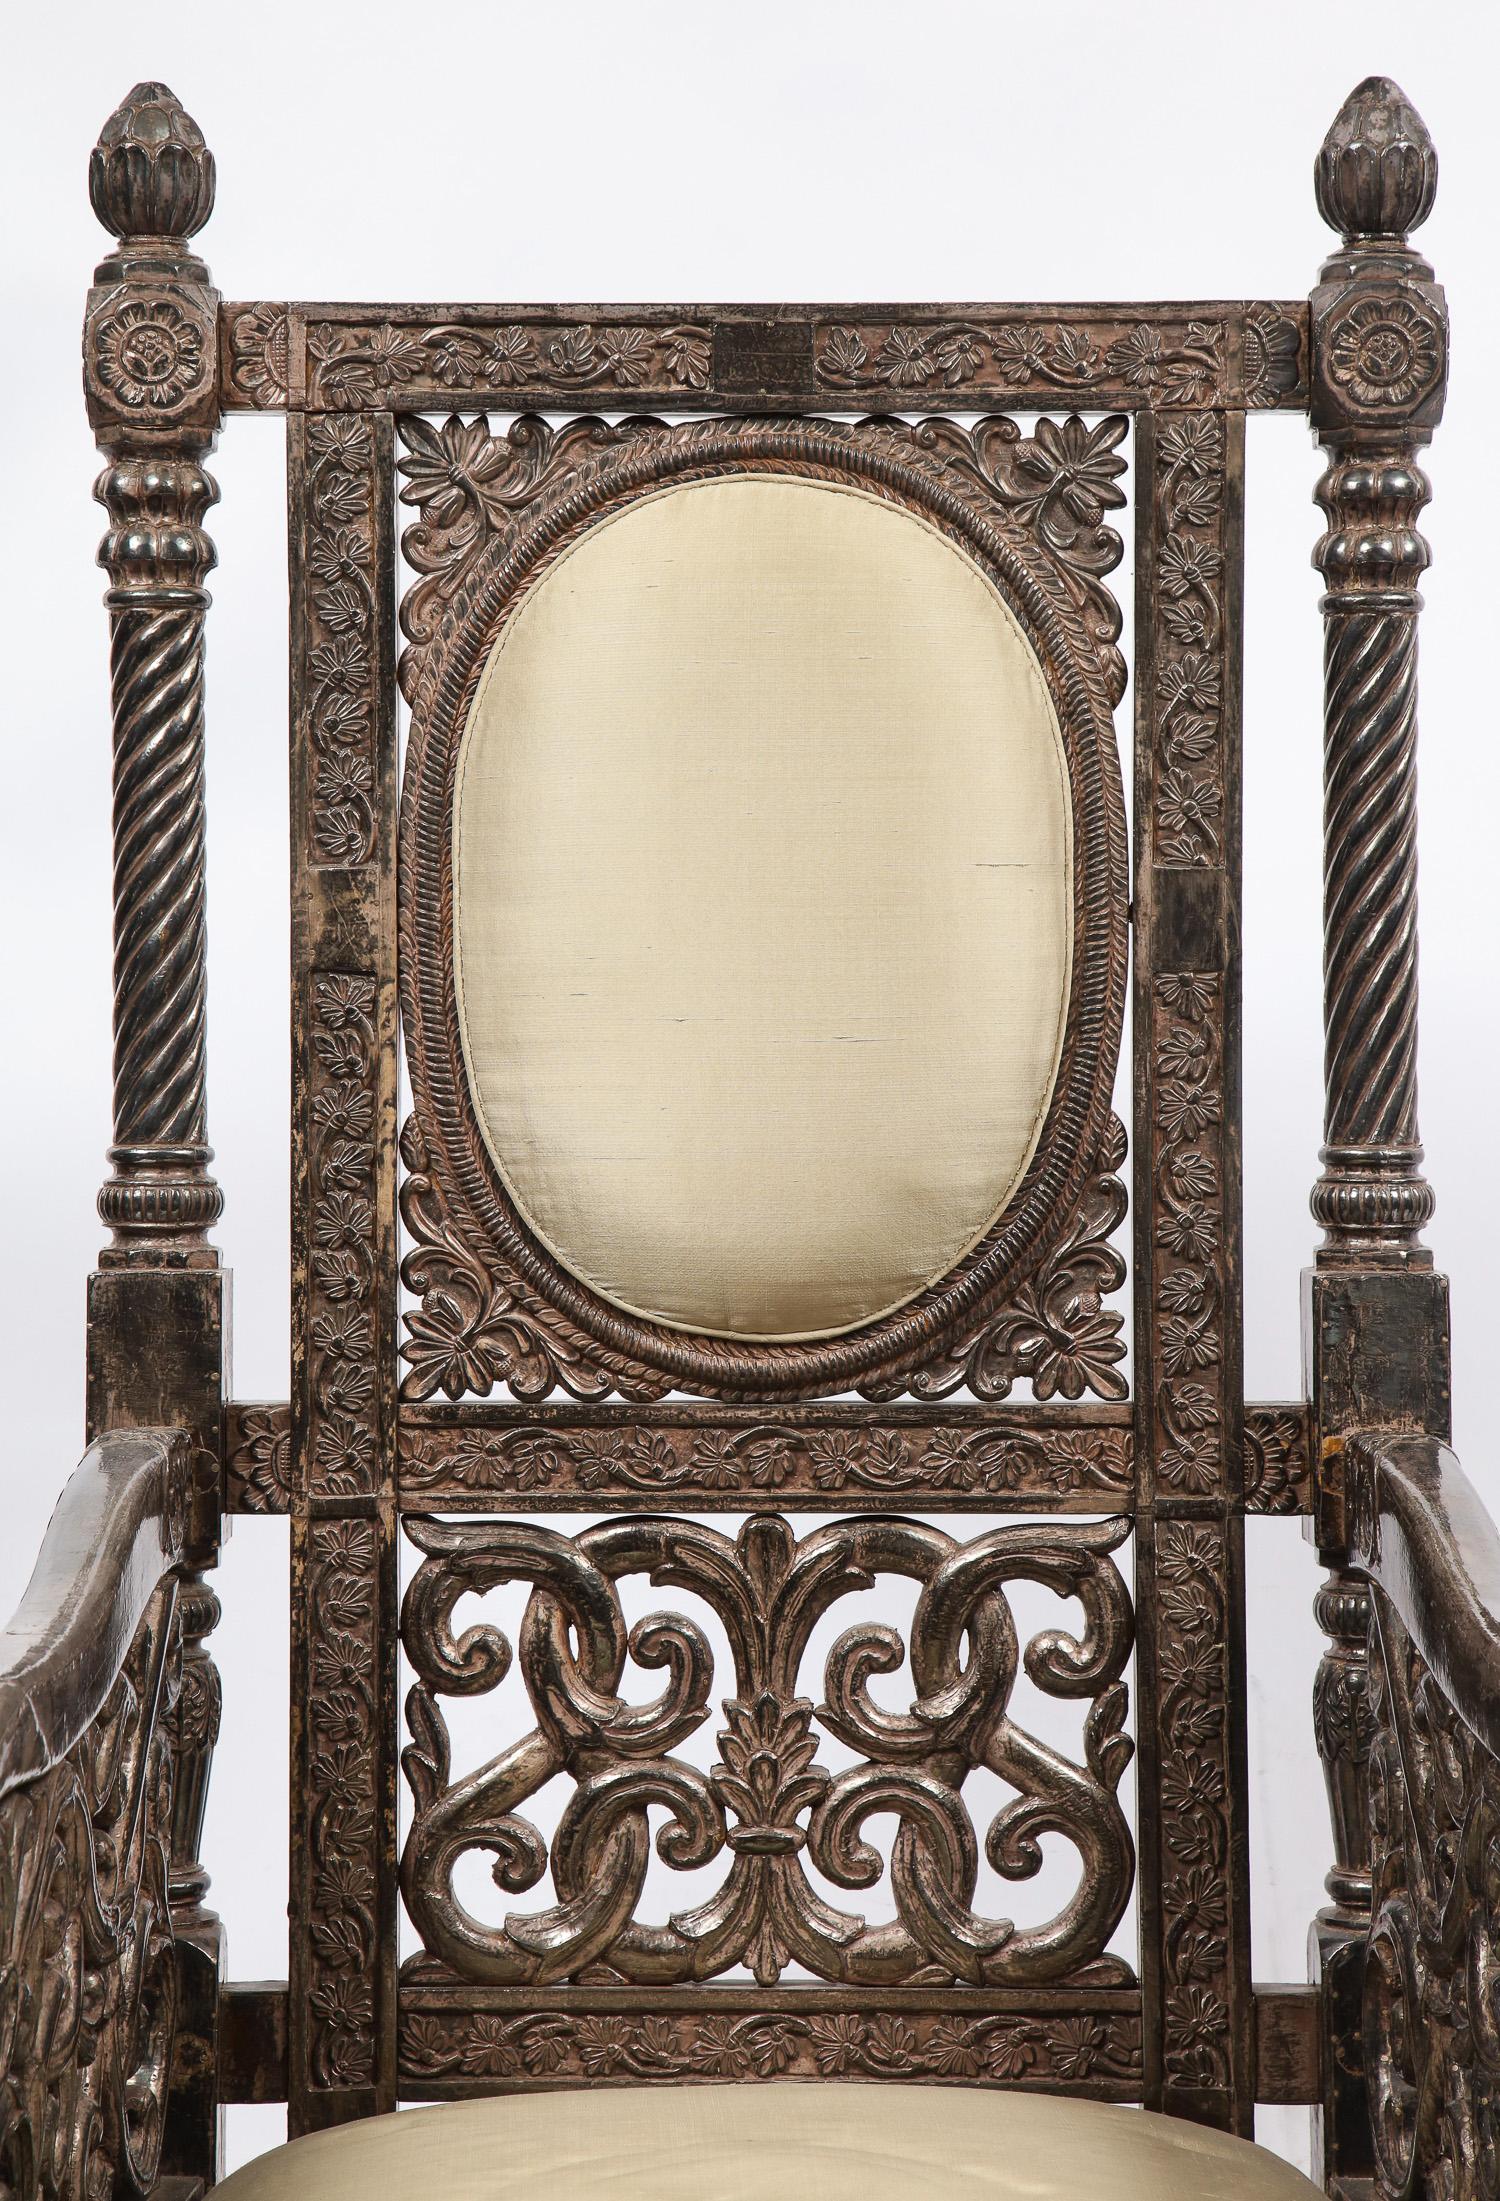 Indian Mogul Style Silver-Clad Gilded Ceremonial Throne Chair for the Maharajah For Sale 7